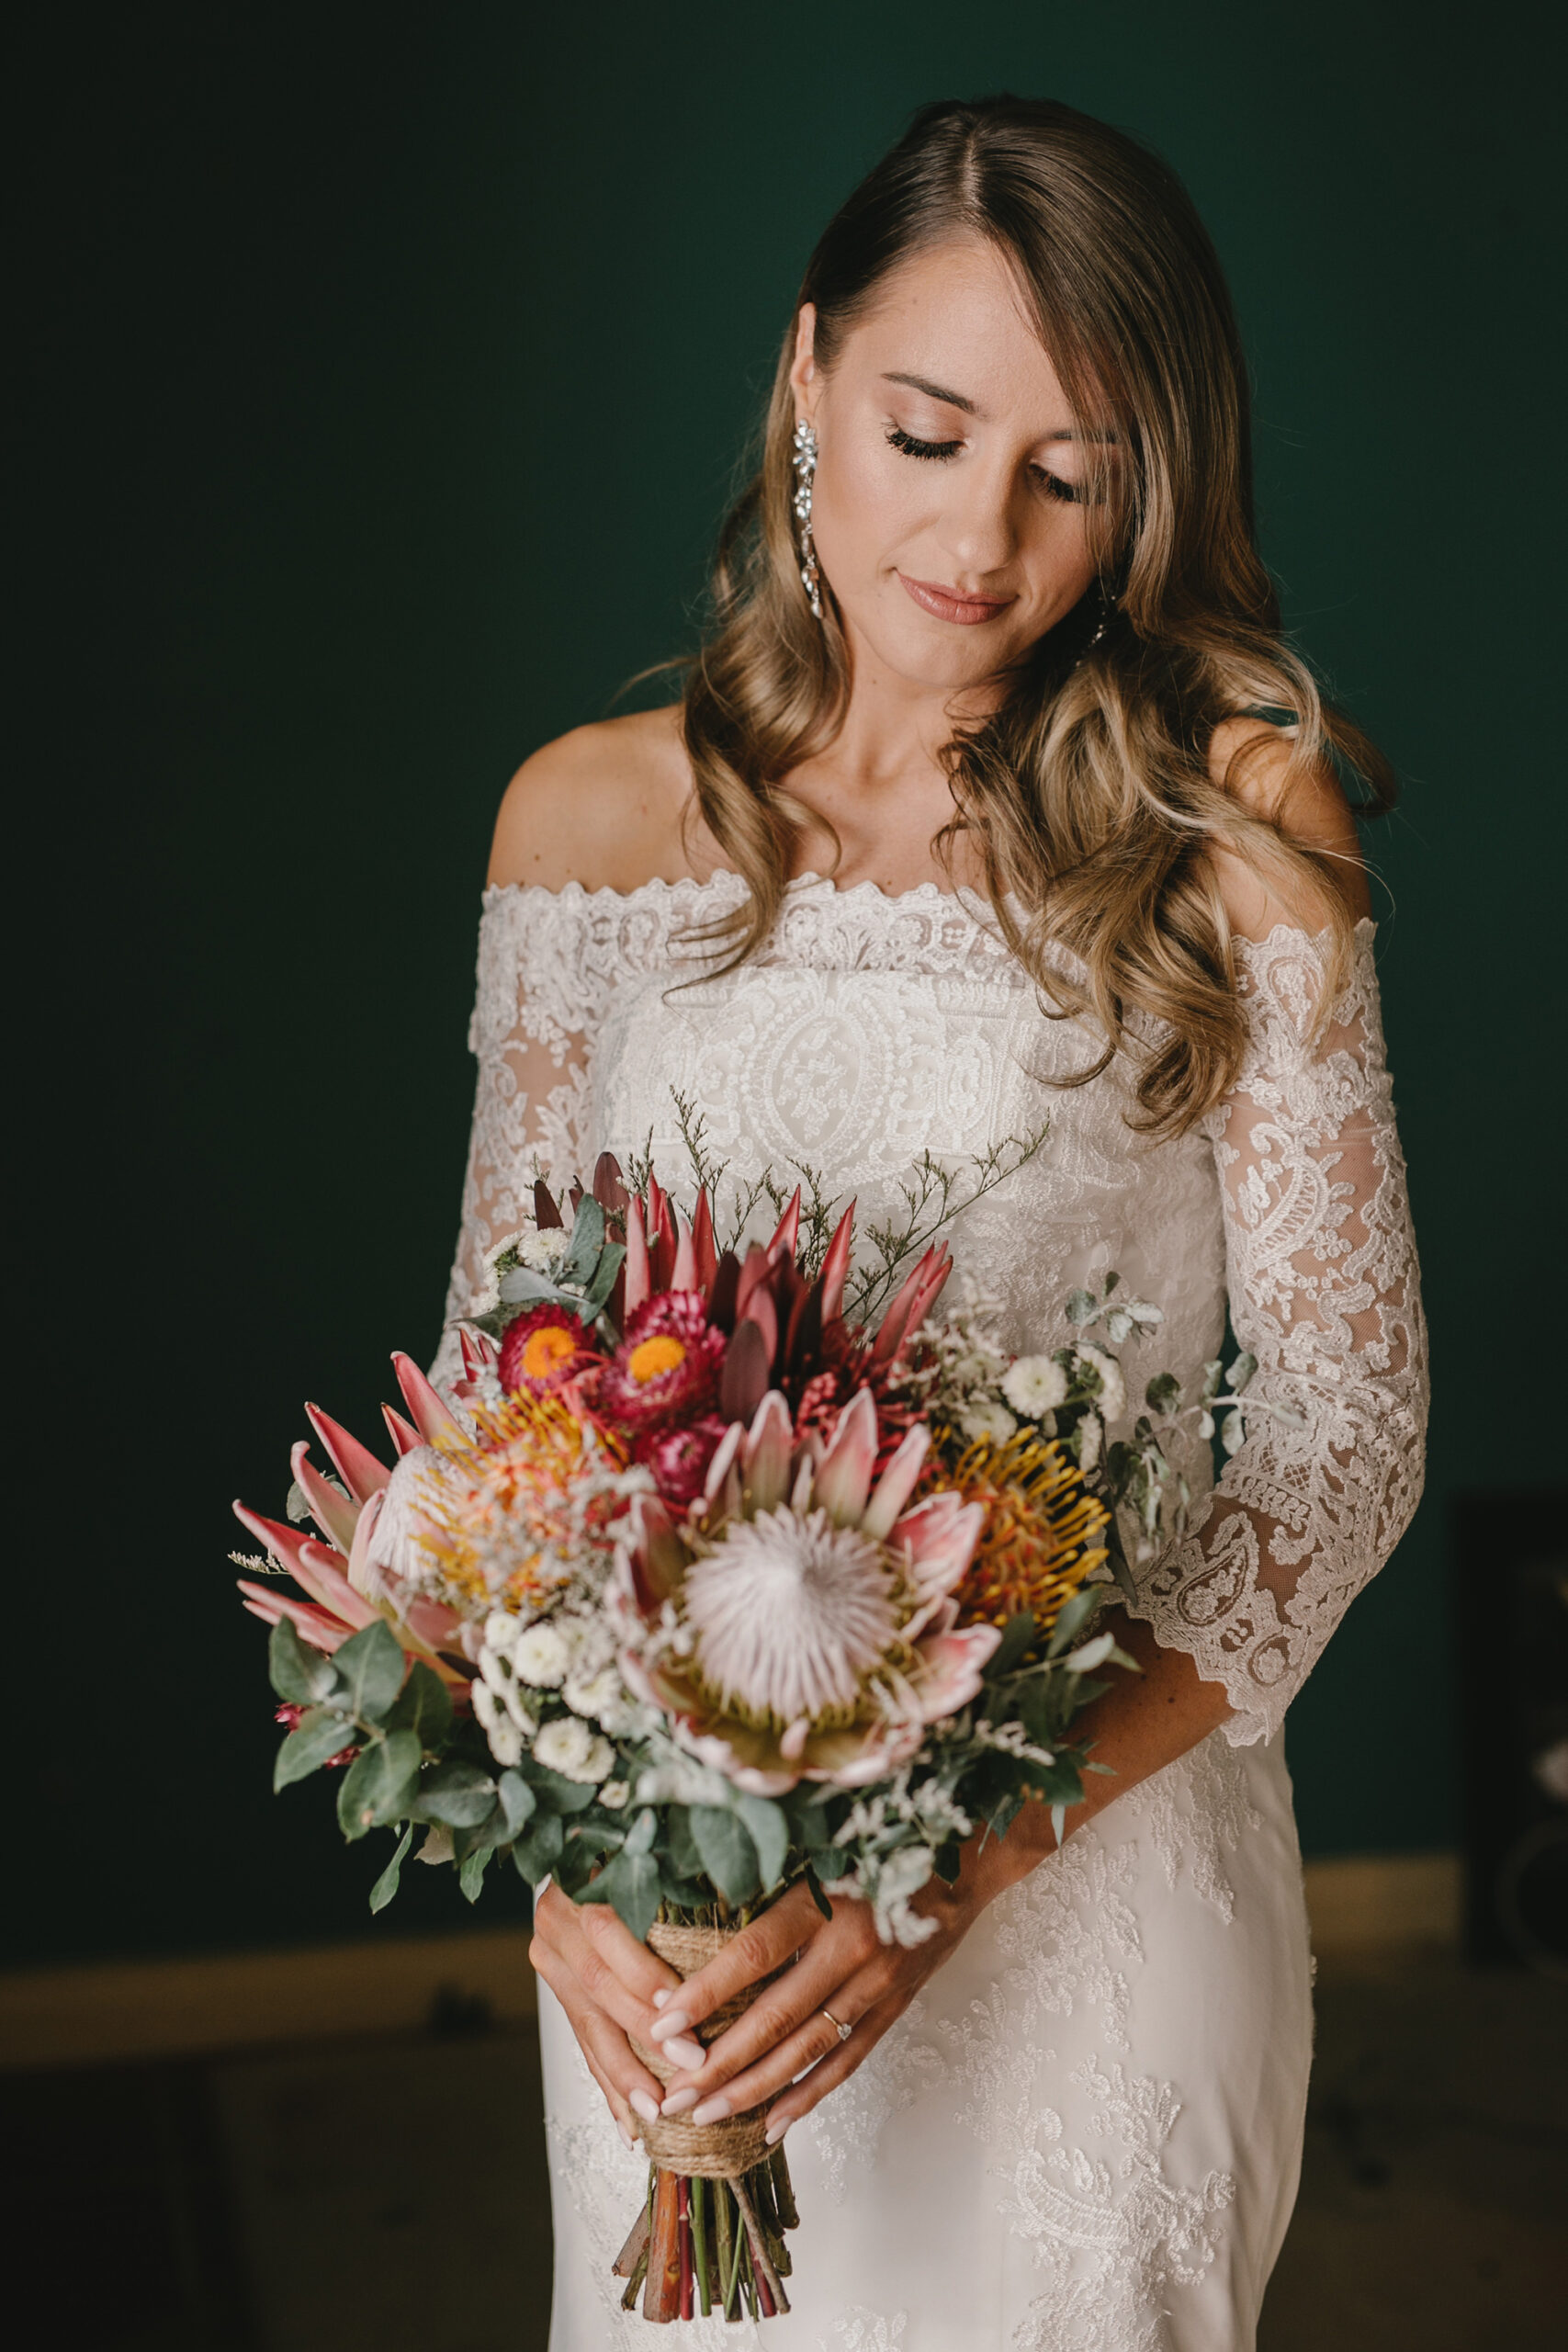 Katie Andrew Rustic Contemporary Wedding DUUET 011 scaled